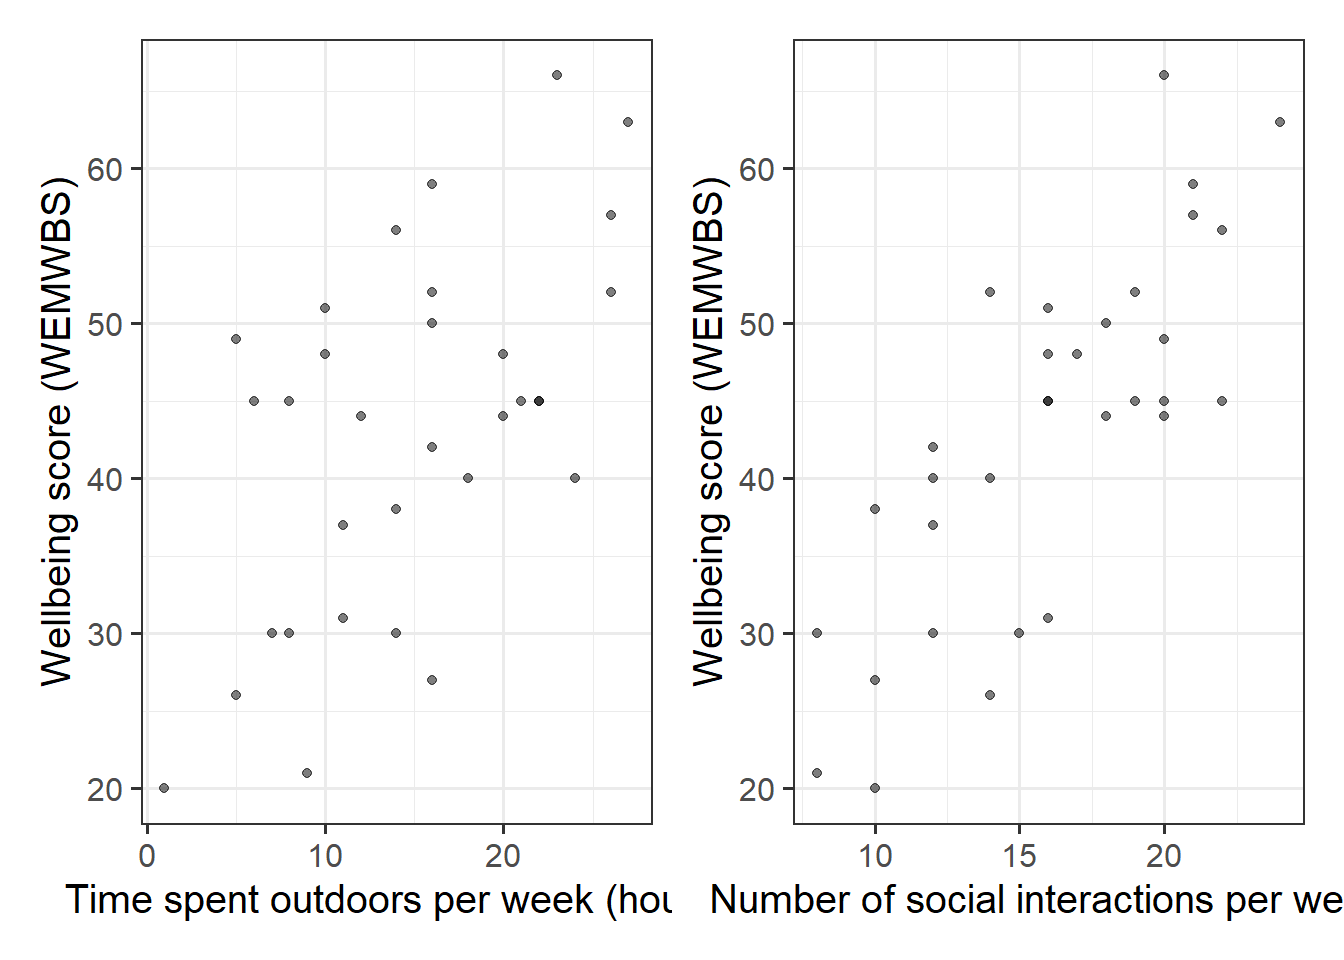 Scatterplots displaying the relationships between scores on the WEMWBS and a) weekly outdoor time (hours), and b) weekly number of social interactions